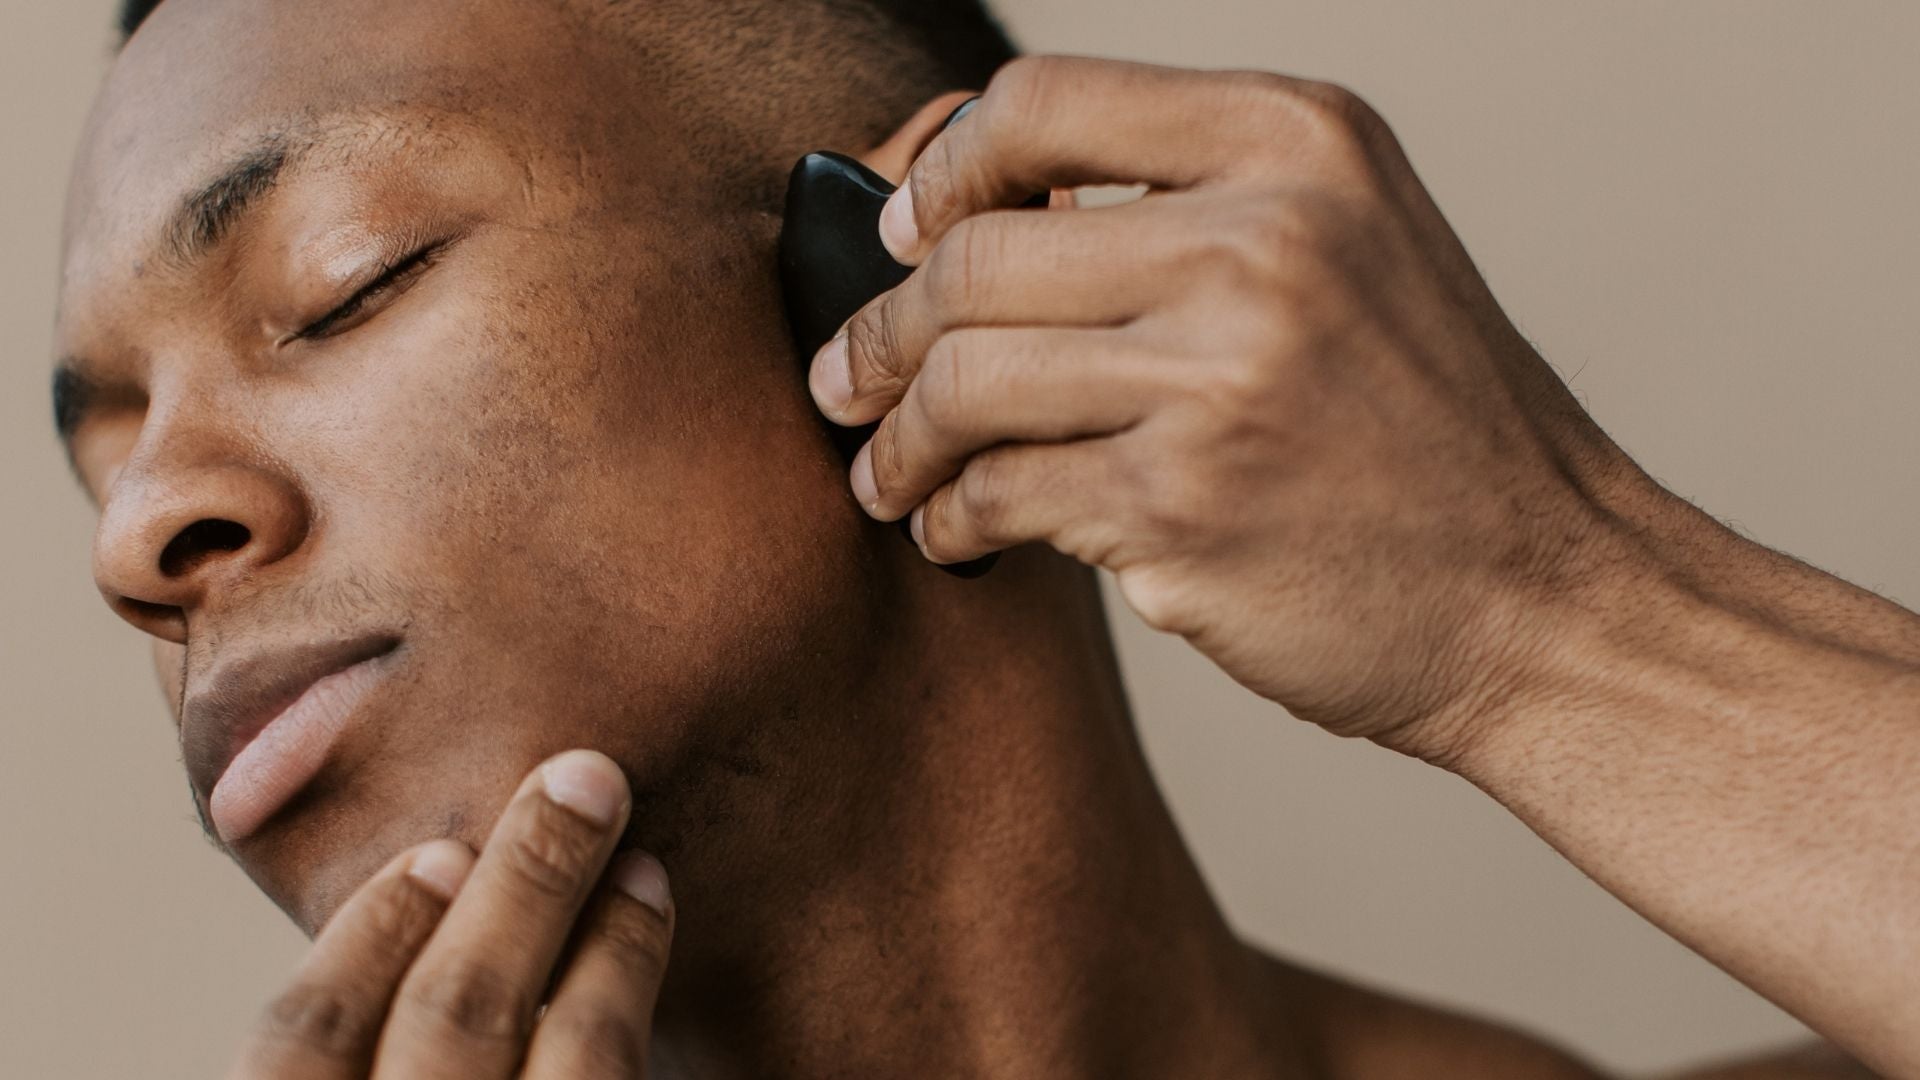 Man using a Gua sha tool on his face